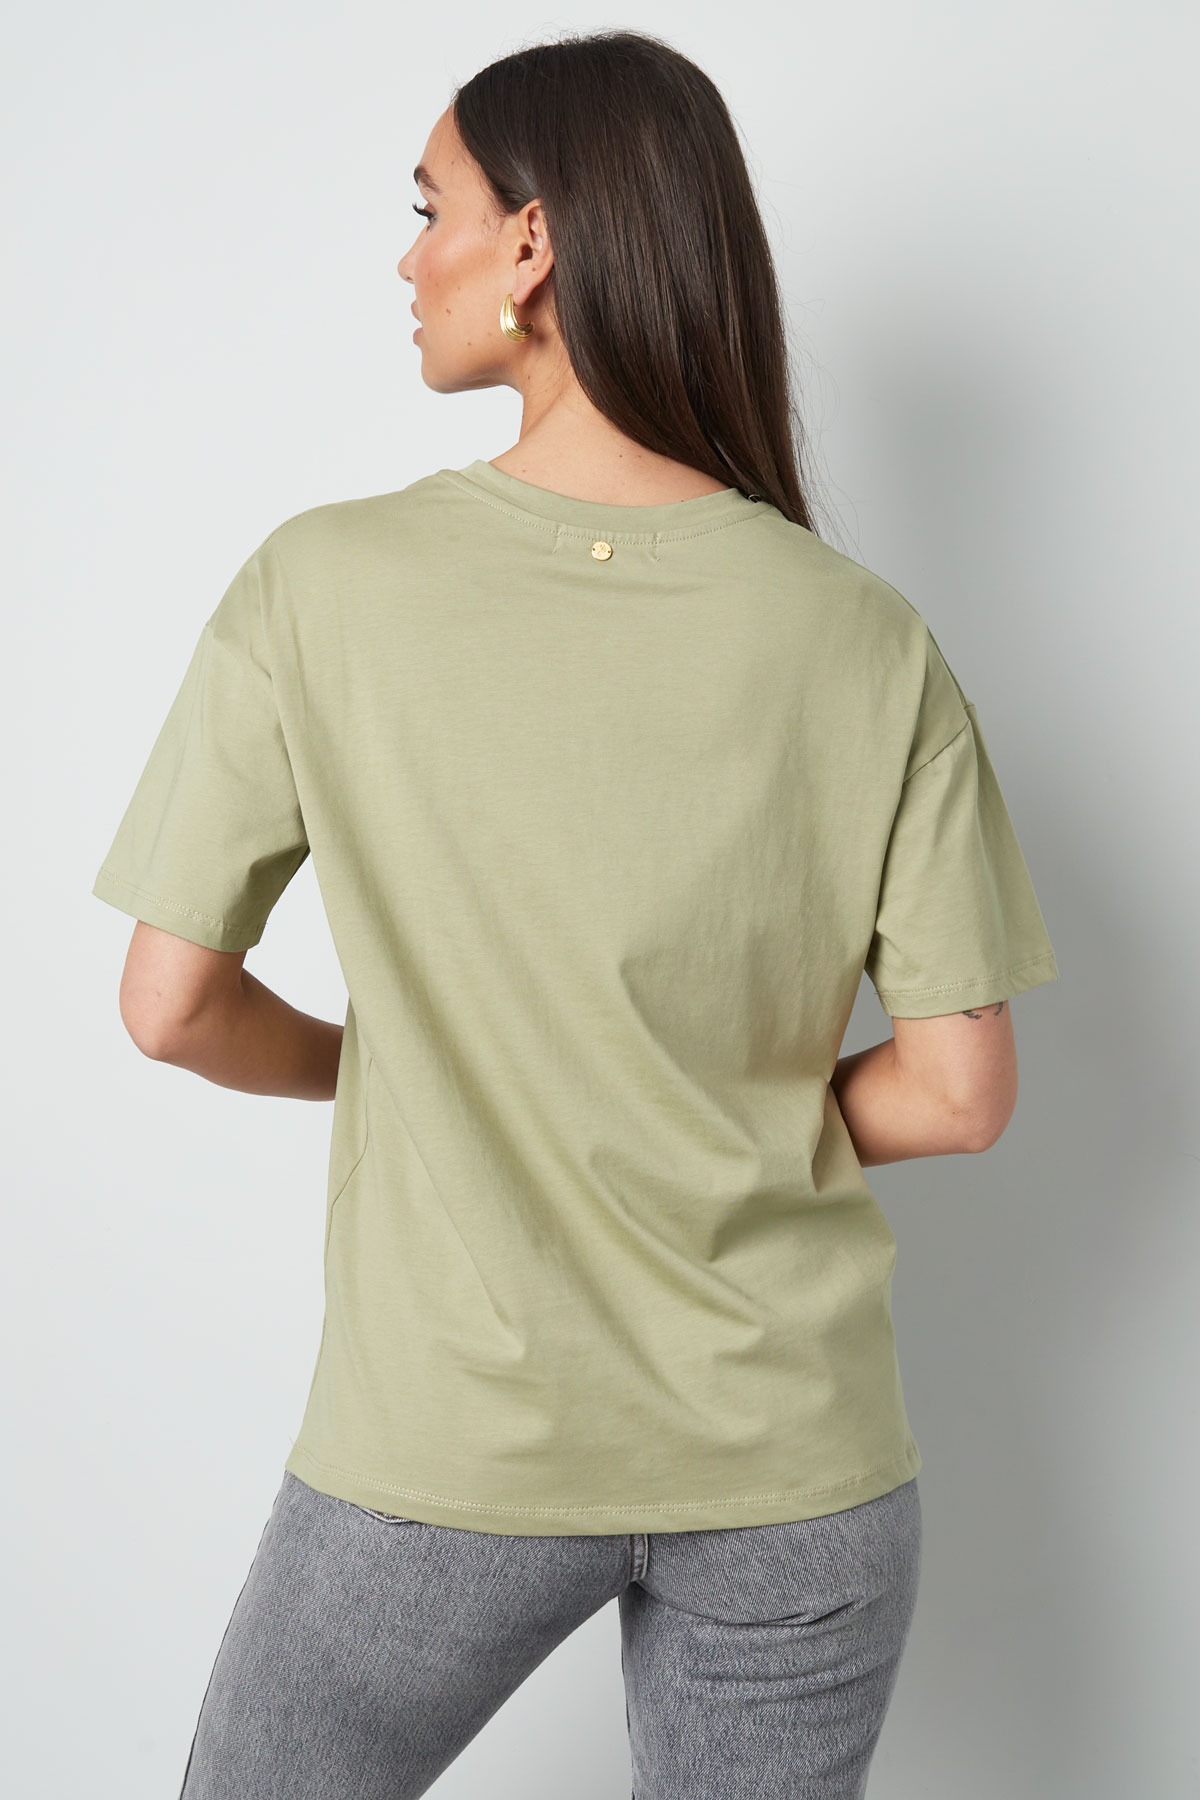 T-shirt ma perle - green Picture6